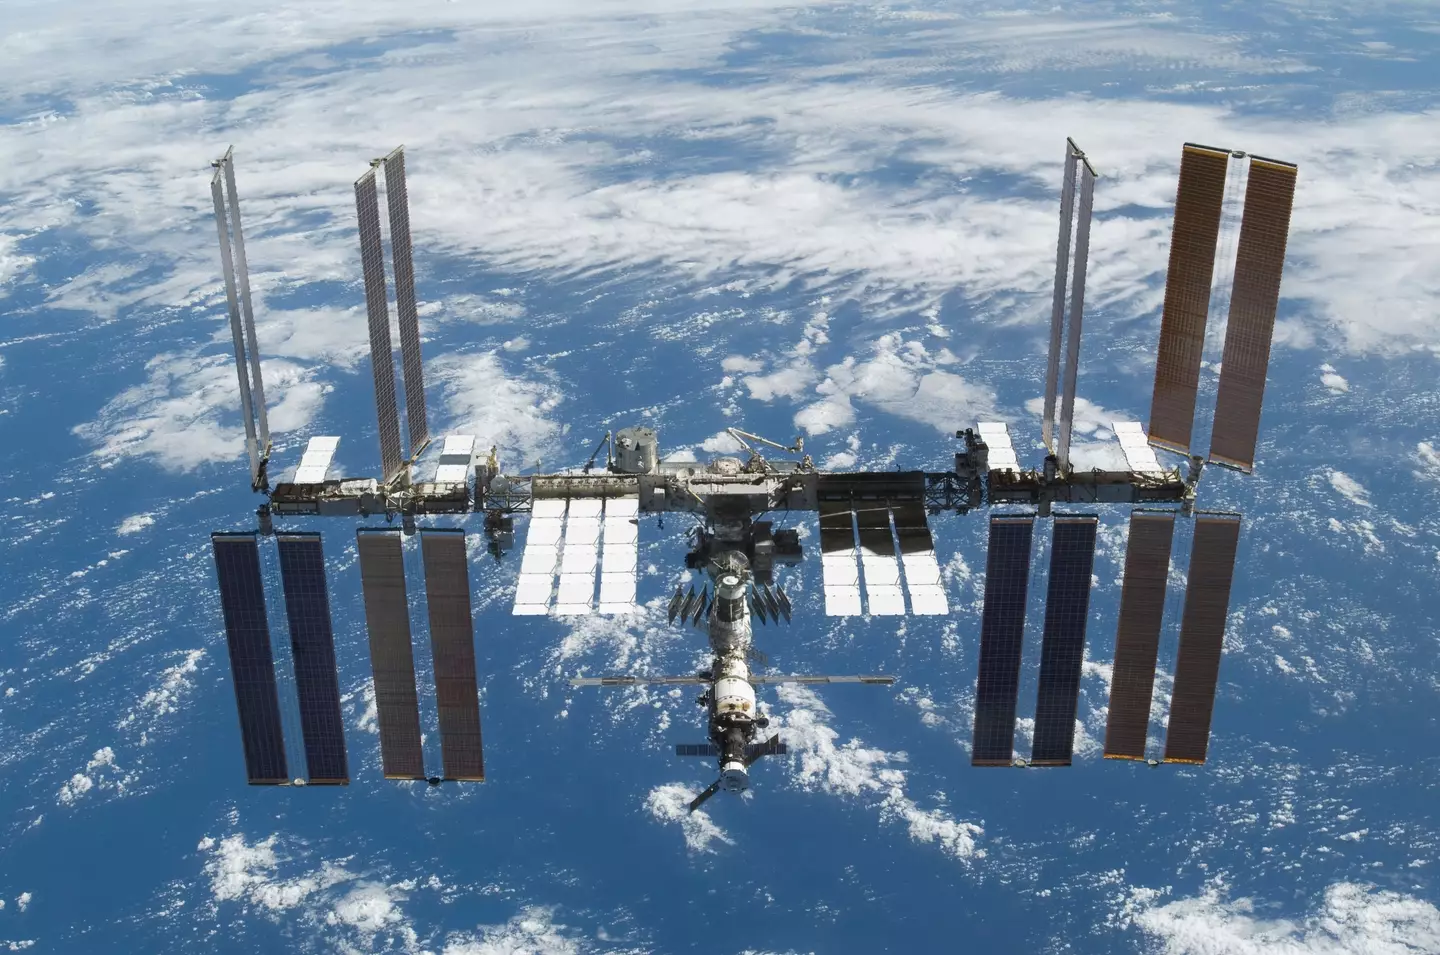 The exterior of the ISS. (Stocktrek Images / Getty)